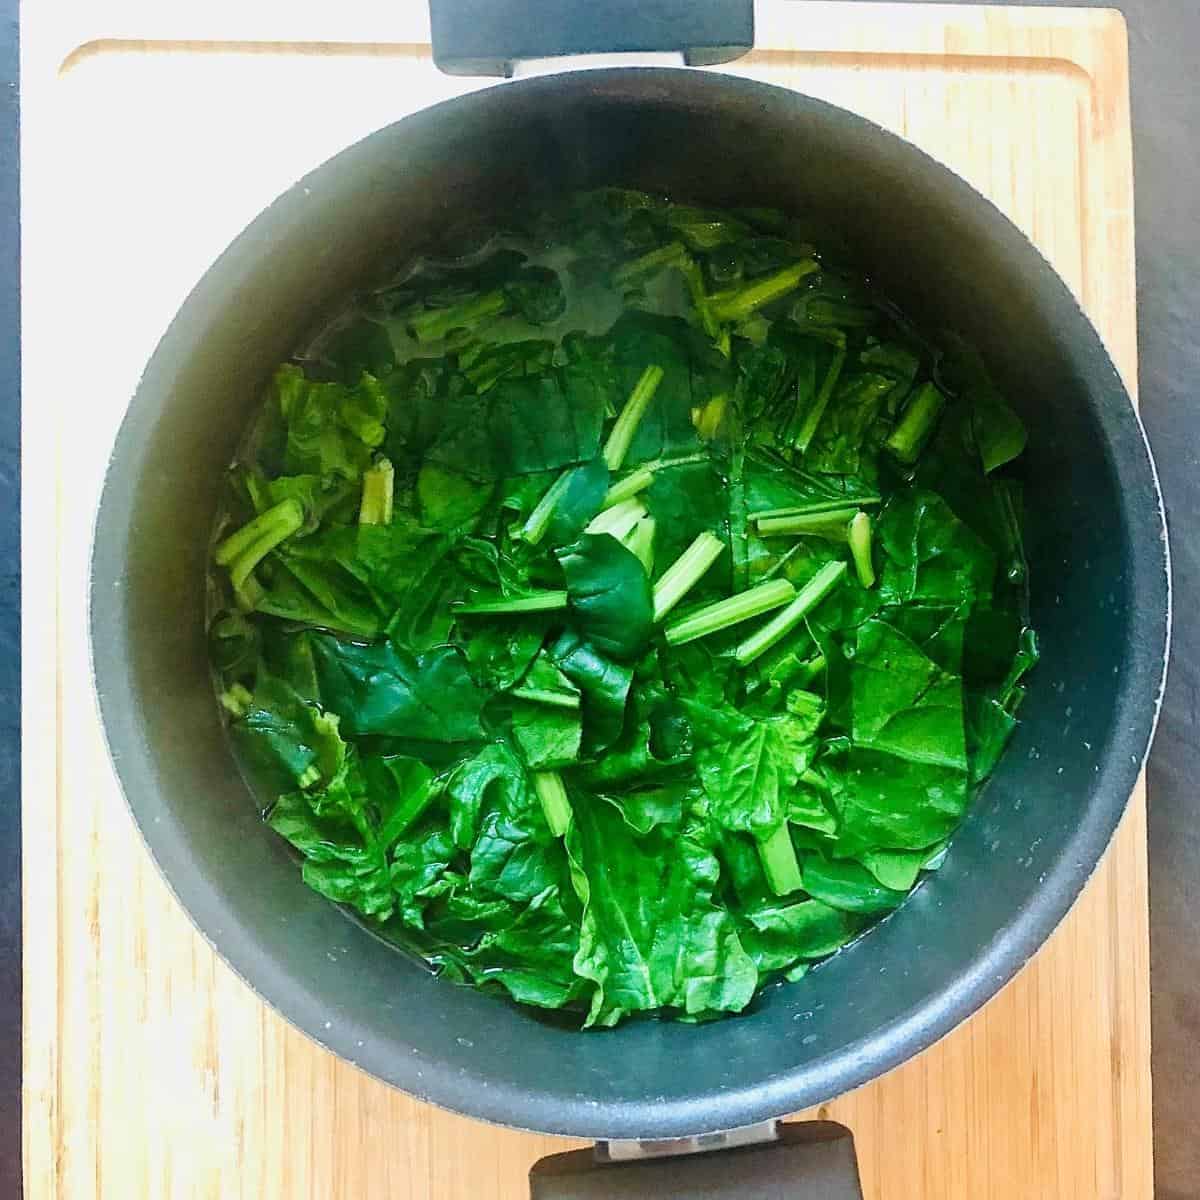 A pan of spinach blanched in boiling water